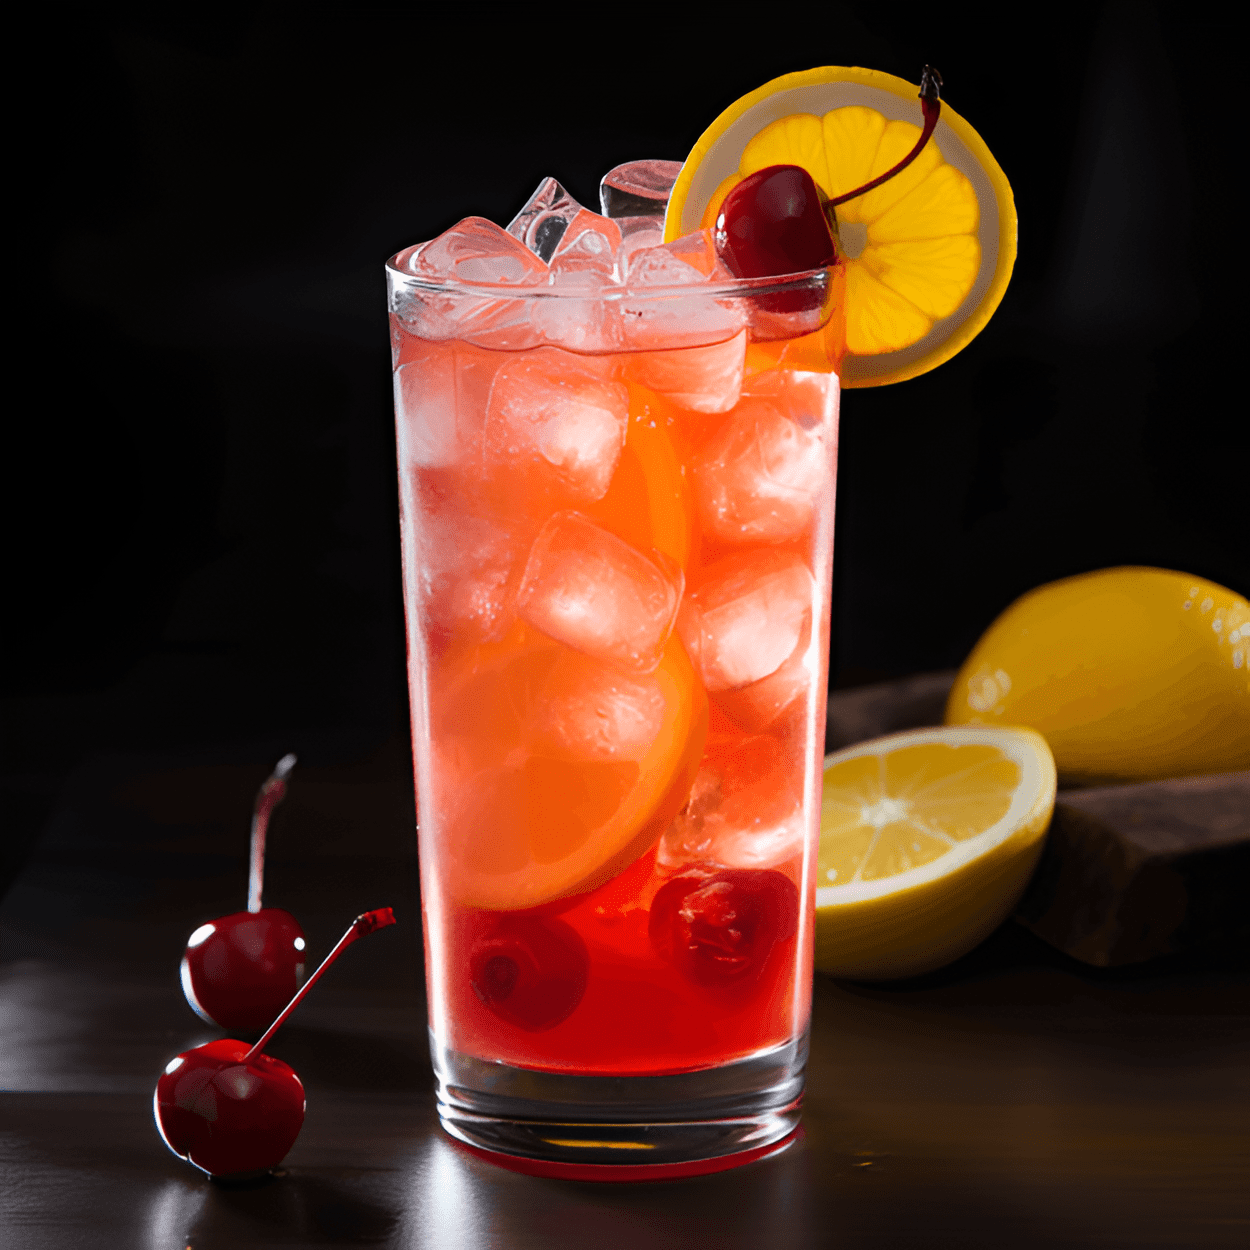 The Sloe Gin Fizz has a sweet, fruity, and slightly tart taste. The sloe gin provides a rich berry flavor, while the lemon juice adds a refreshing citrus note. The addition of simple syrup balances the tartness, and the club soda gives the drink a light, effervescent texture.